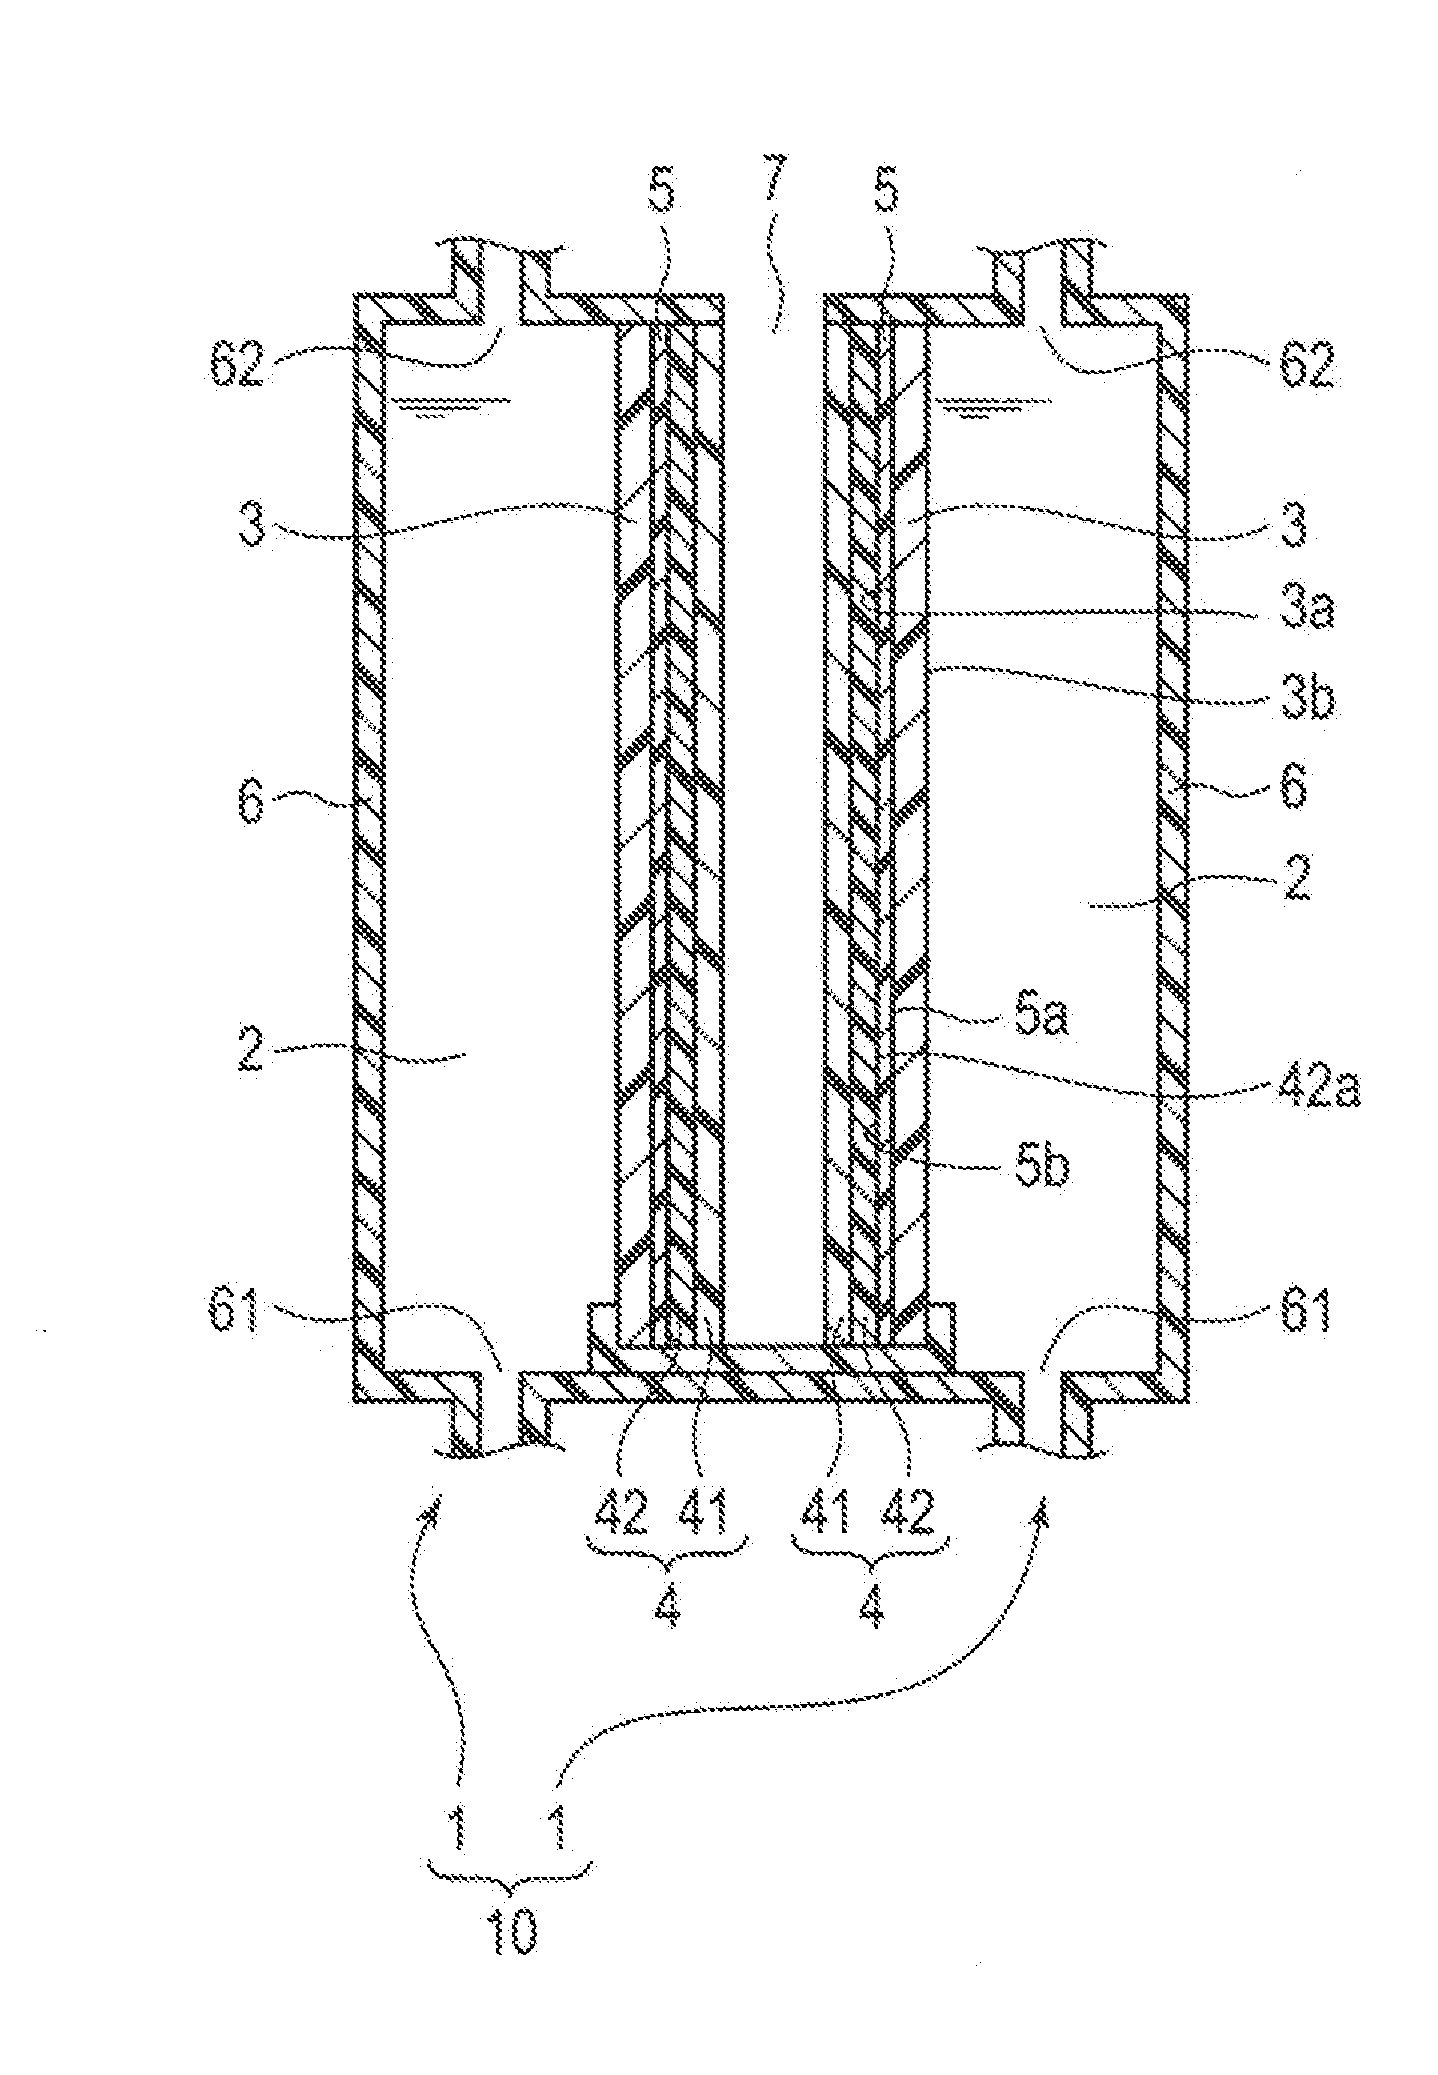 Microbial fuel cell, microbial fuel cell system, and method for using microbial fuel cell